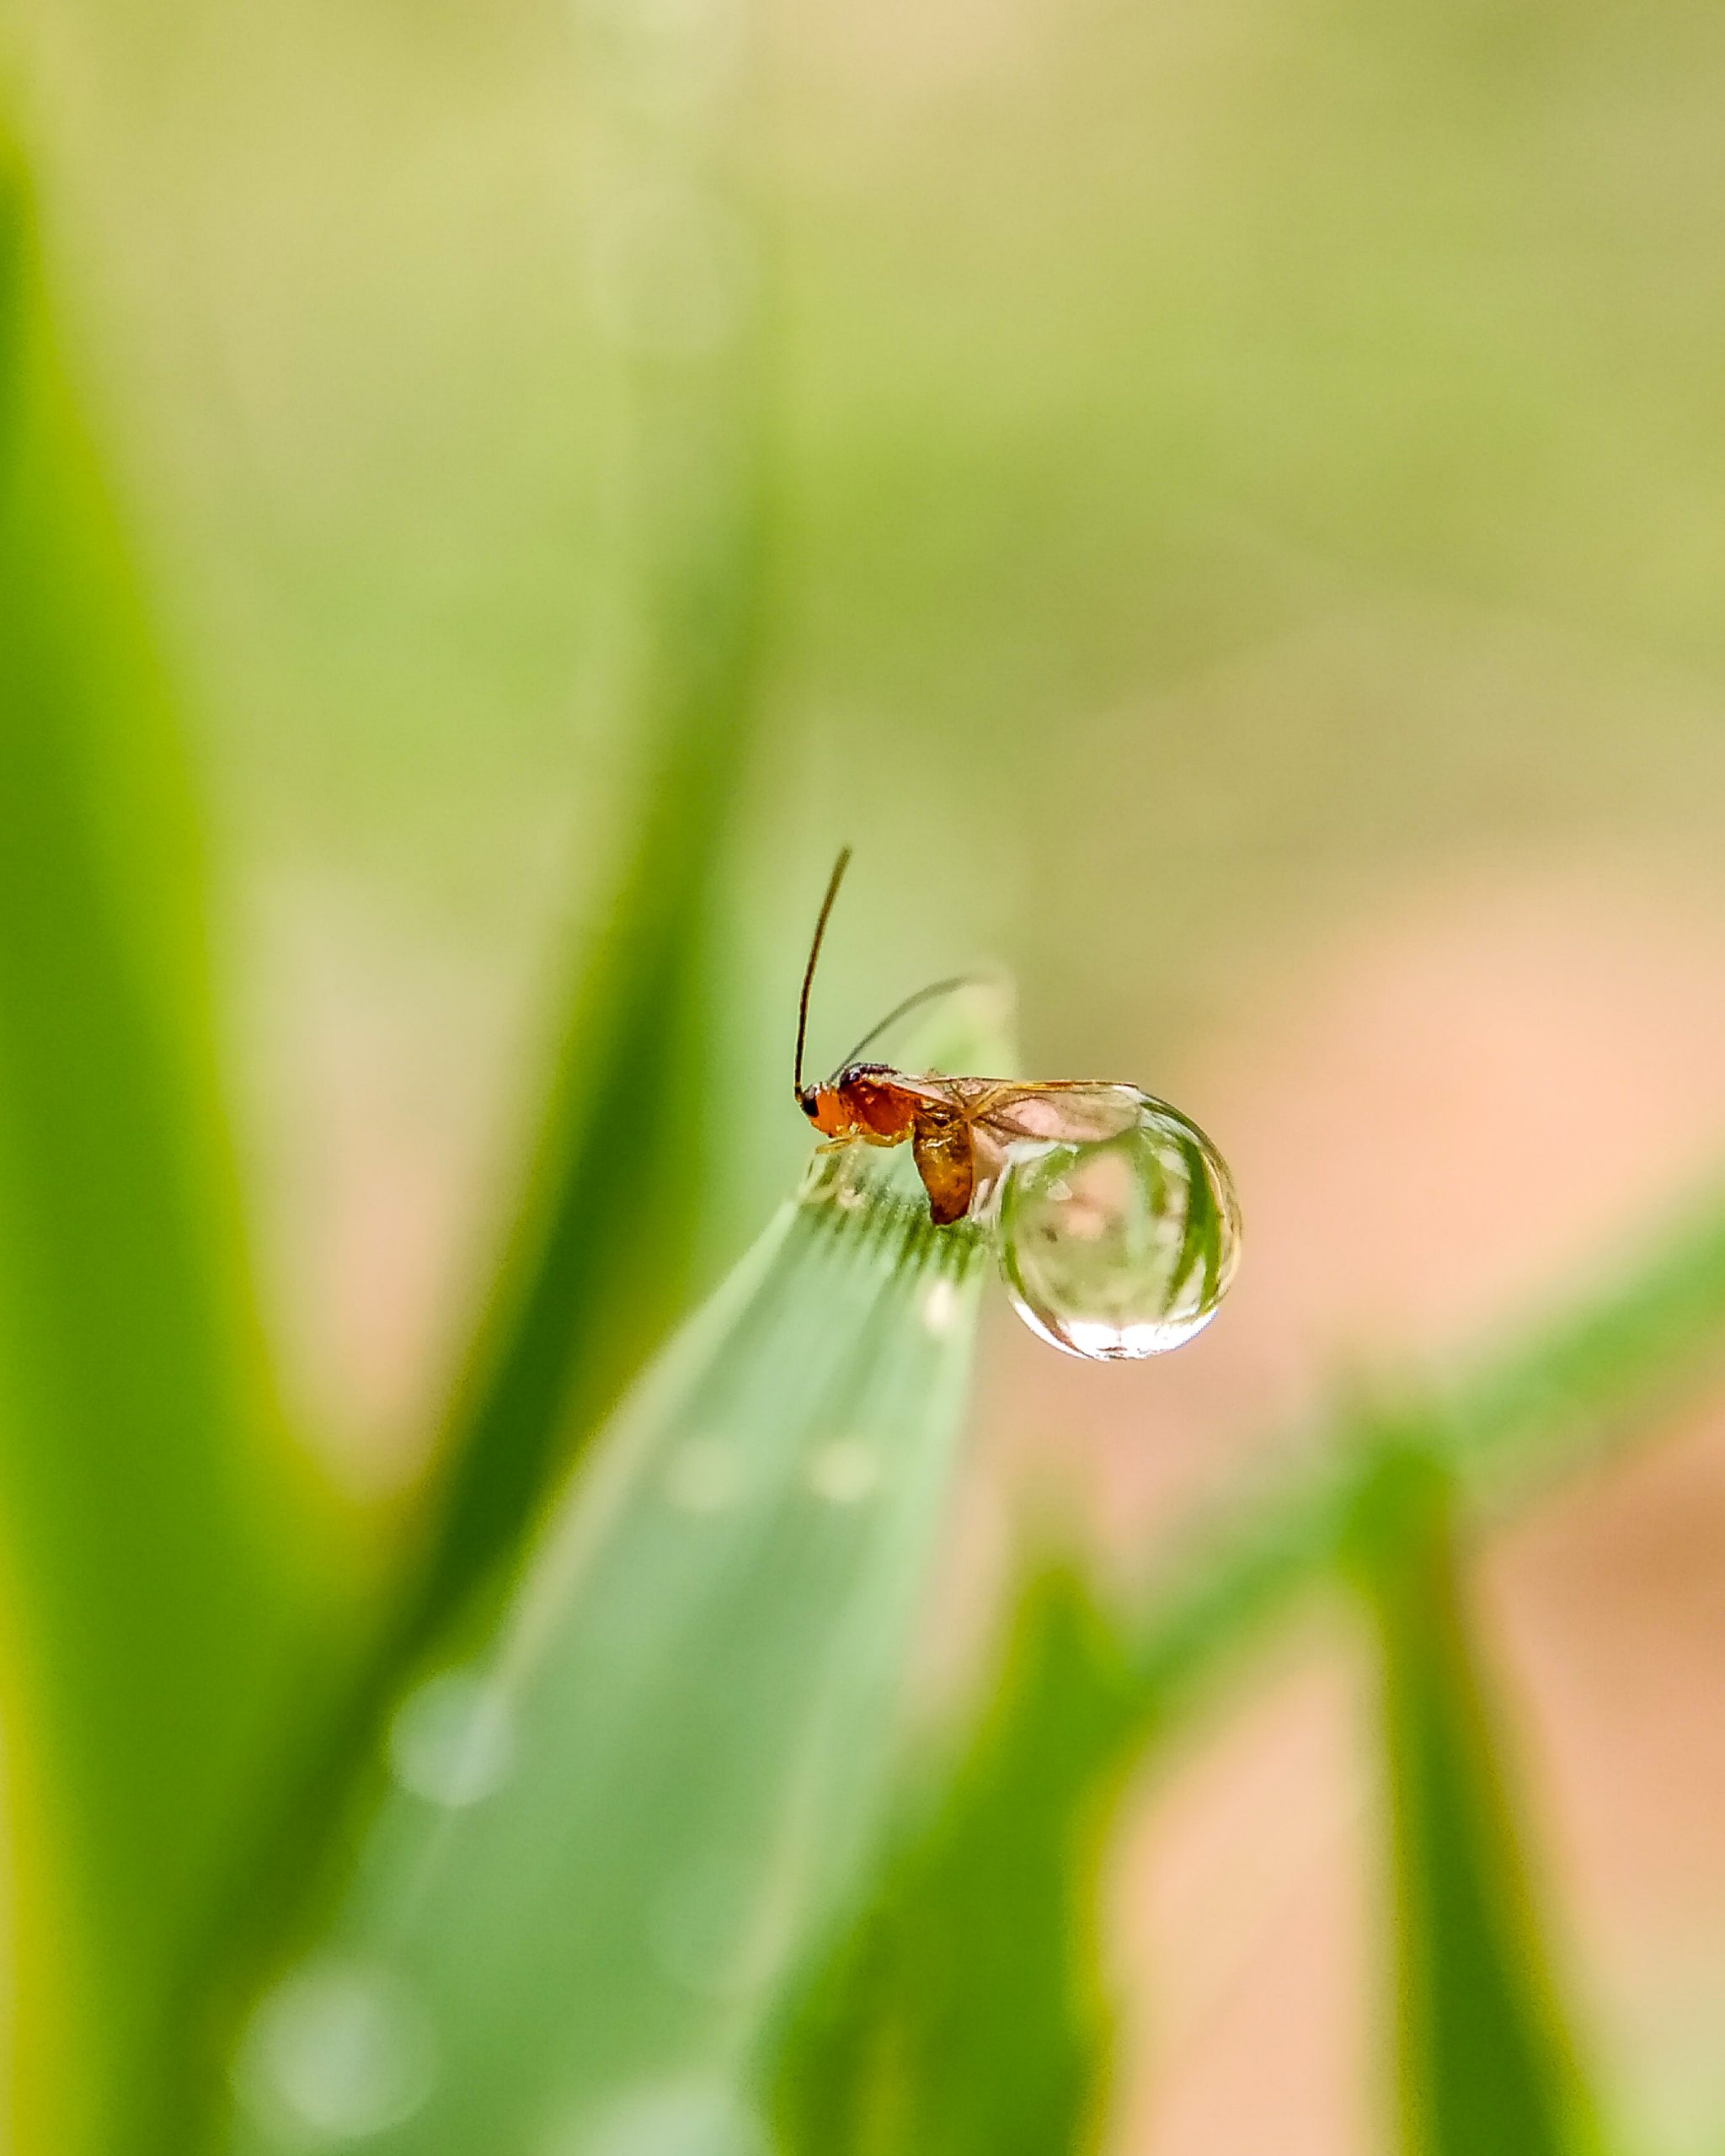 A little insect with droplet